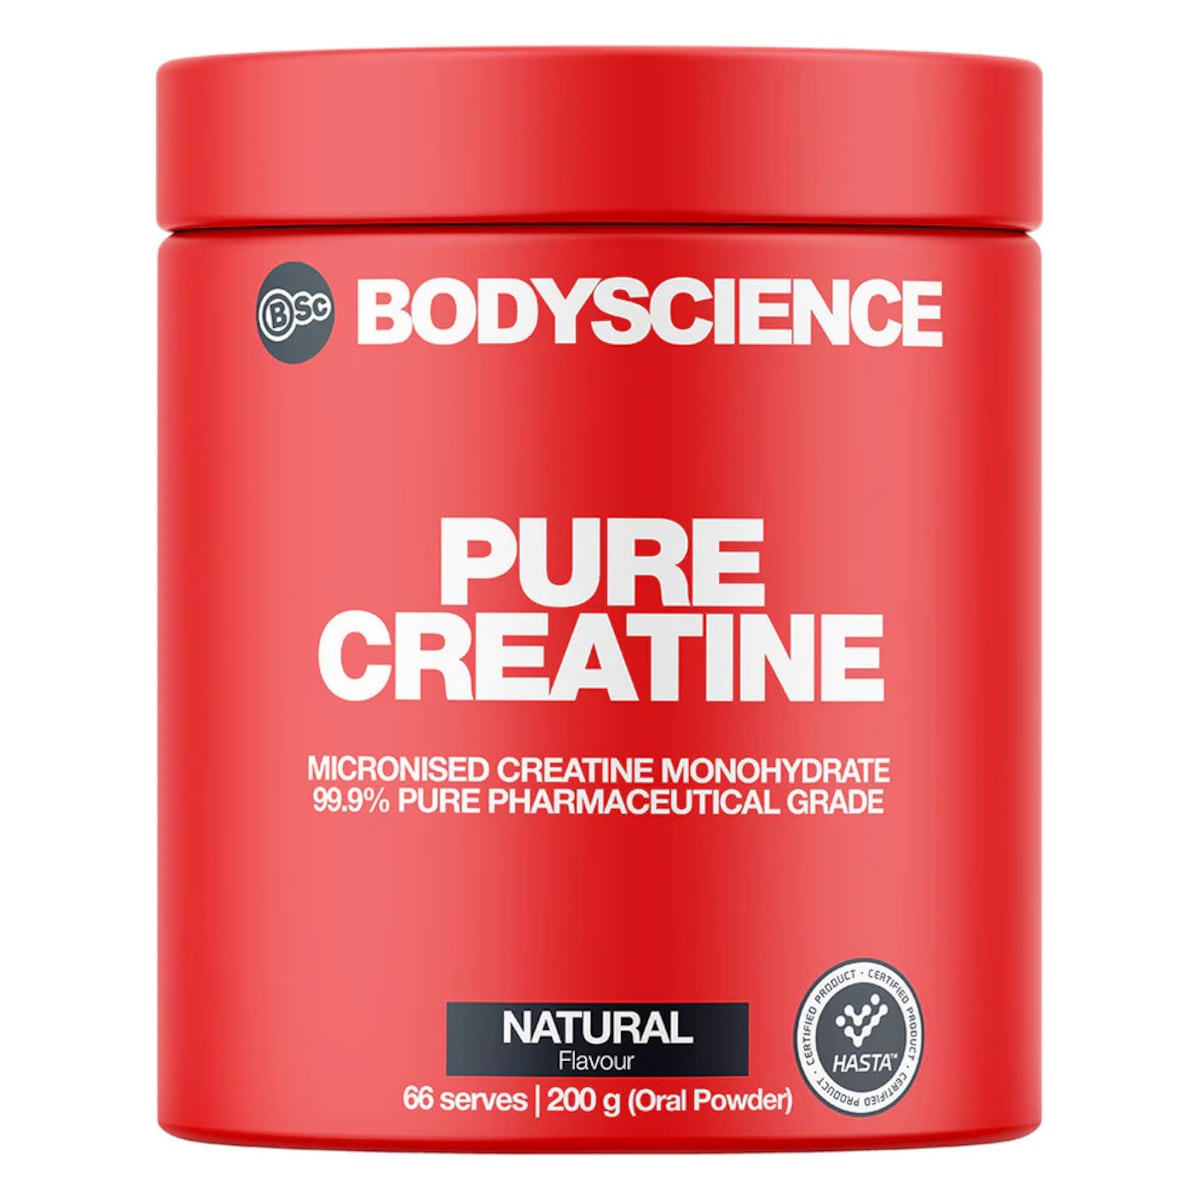 Bsc Body Science Pure Creatine 200G